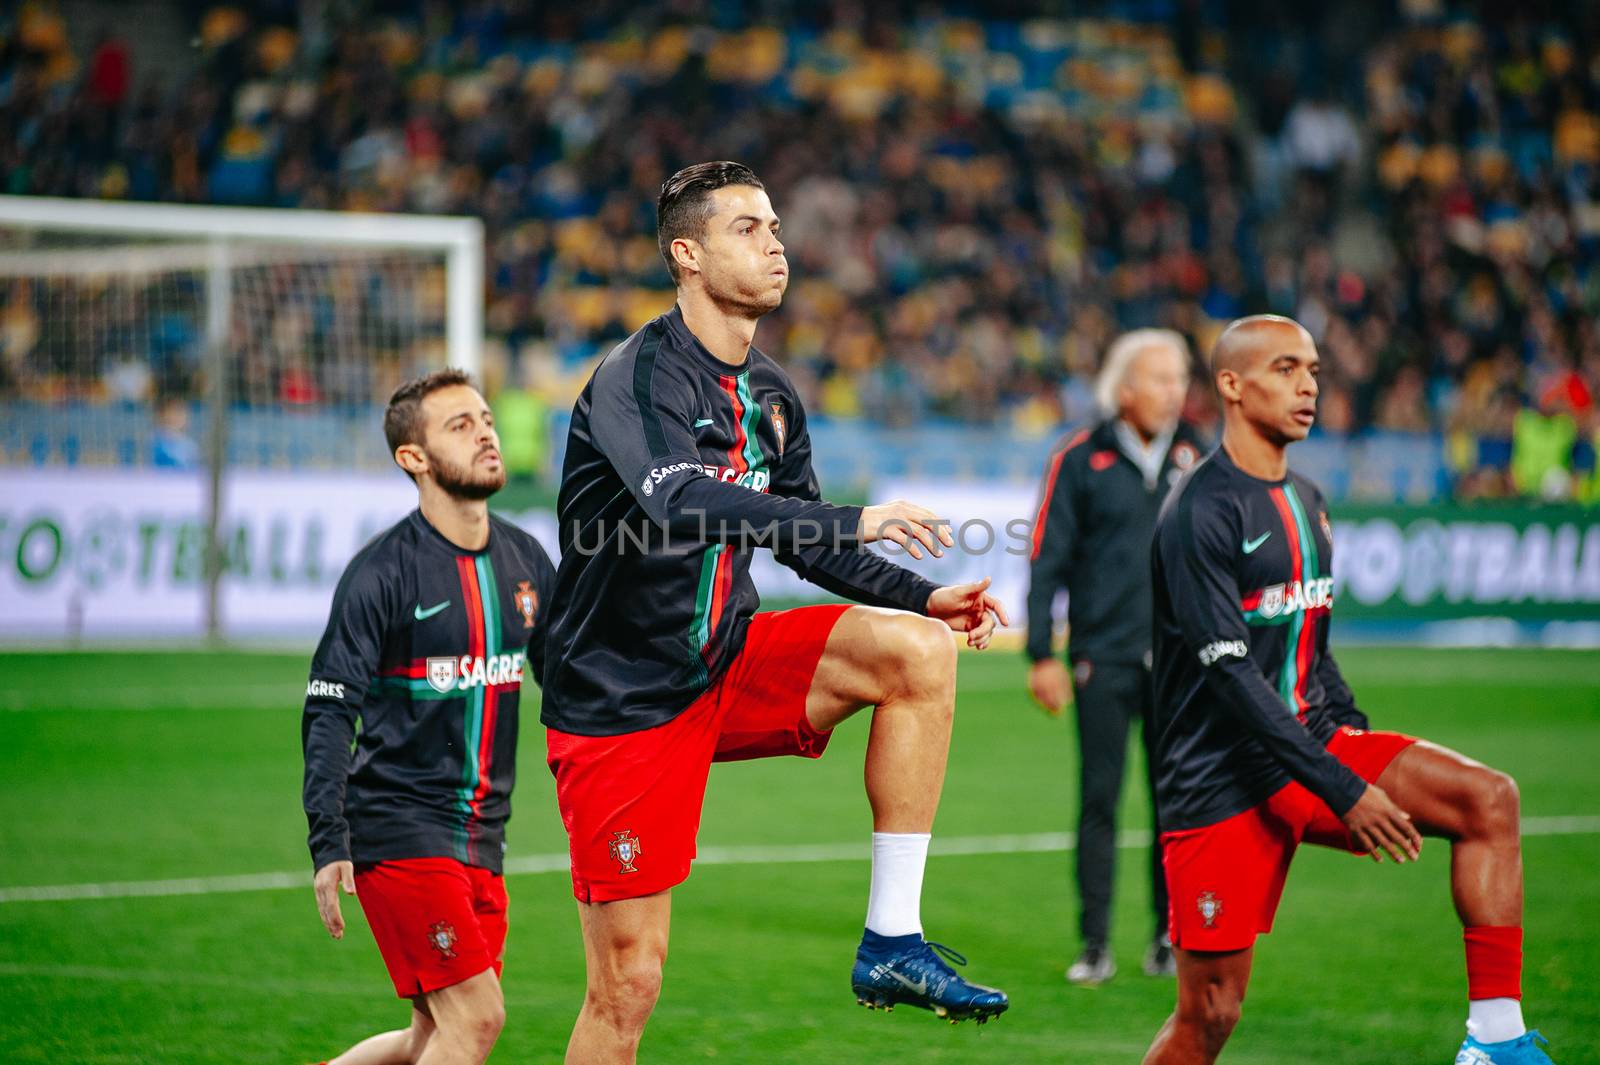 Kyiv, Ukraine - October 14, 2019: Cristiano Ronaldo, captain and forward of Portugal national team during the prematch training at the Olympic Stadium